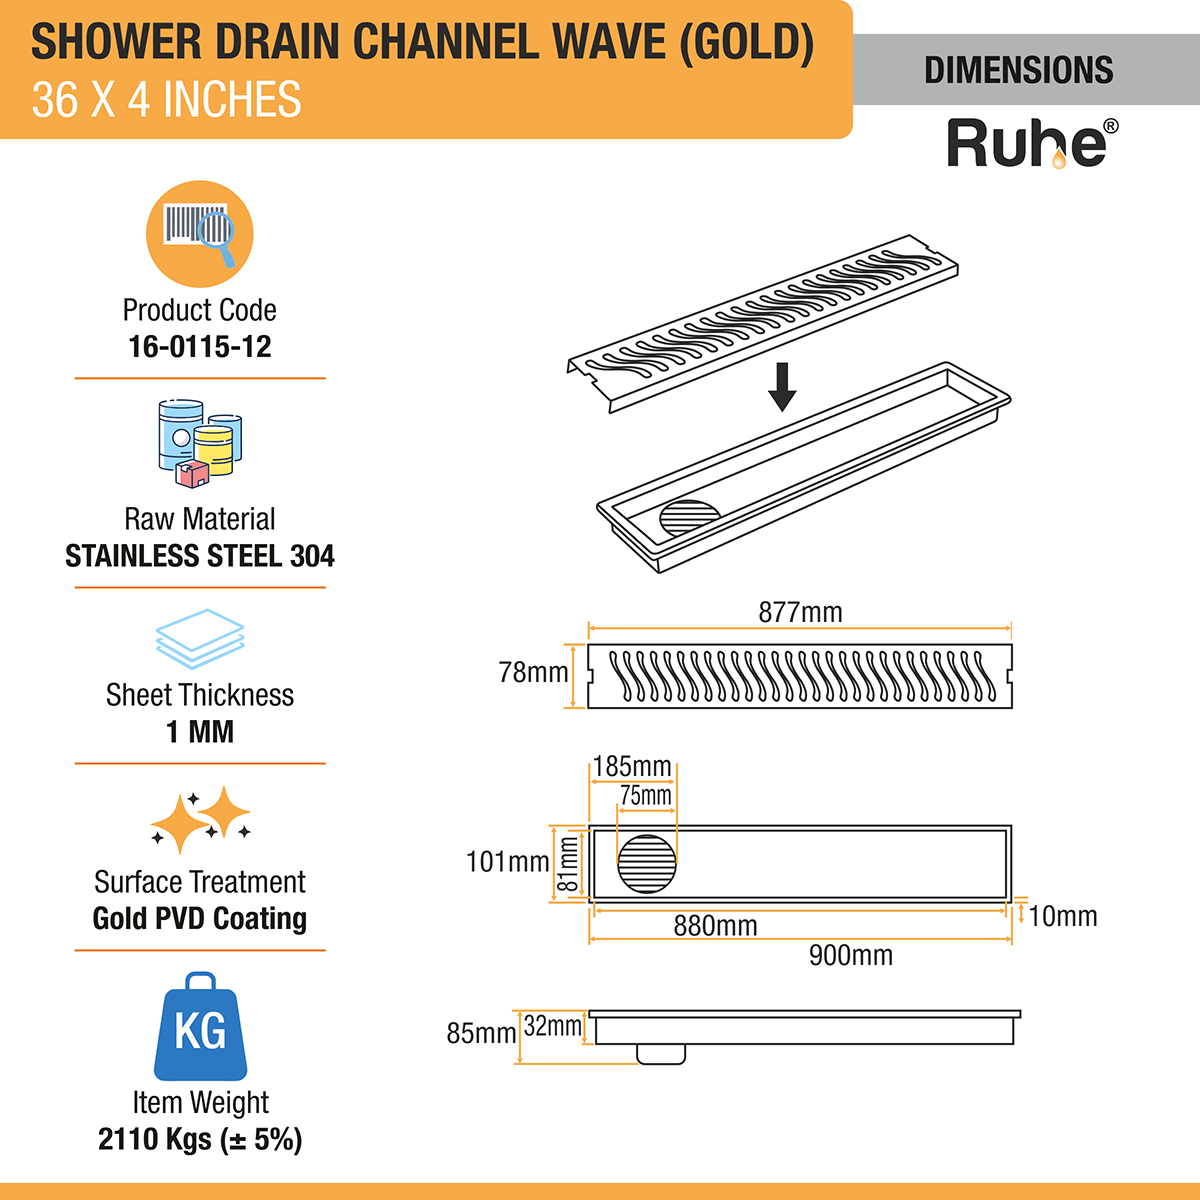 Wave Shower Drain Channel (36 x 4 Inches) YELLOW GOLD dimensions and size